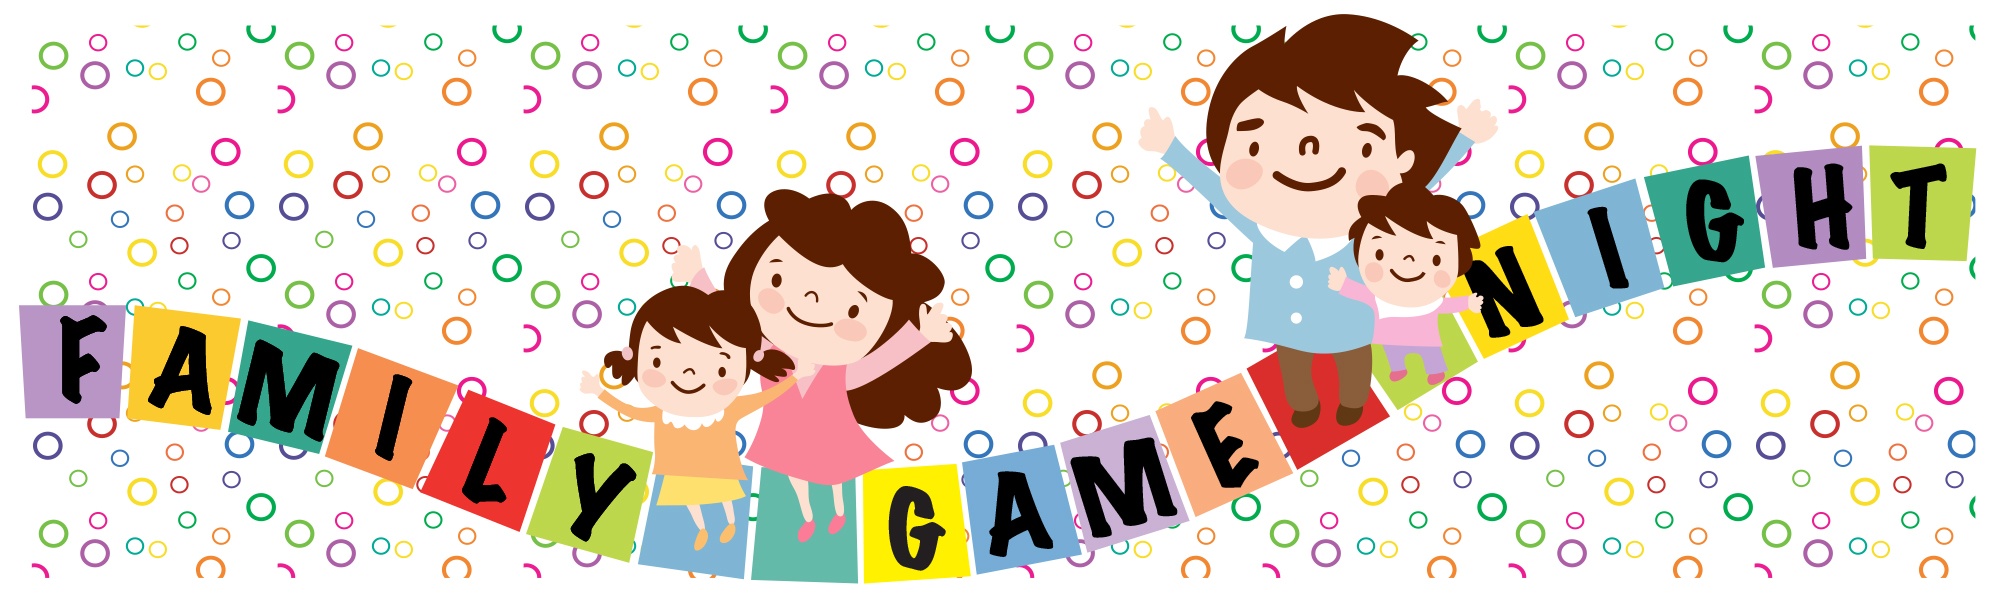 clipart family game night - photo #15